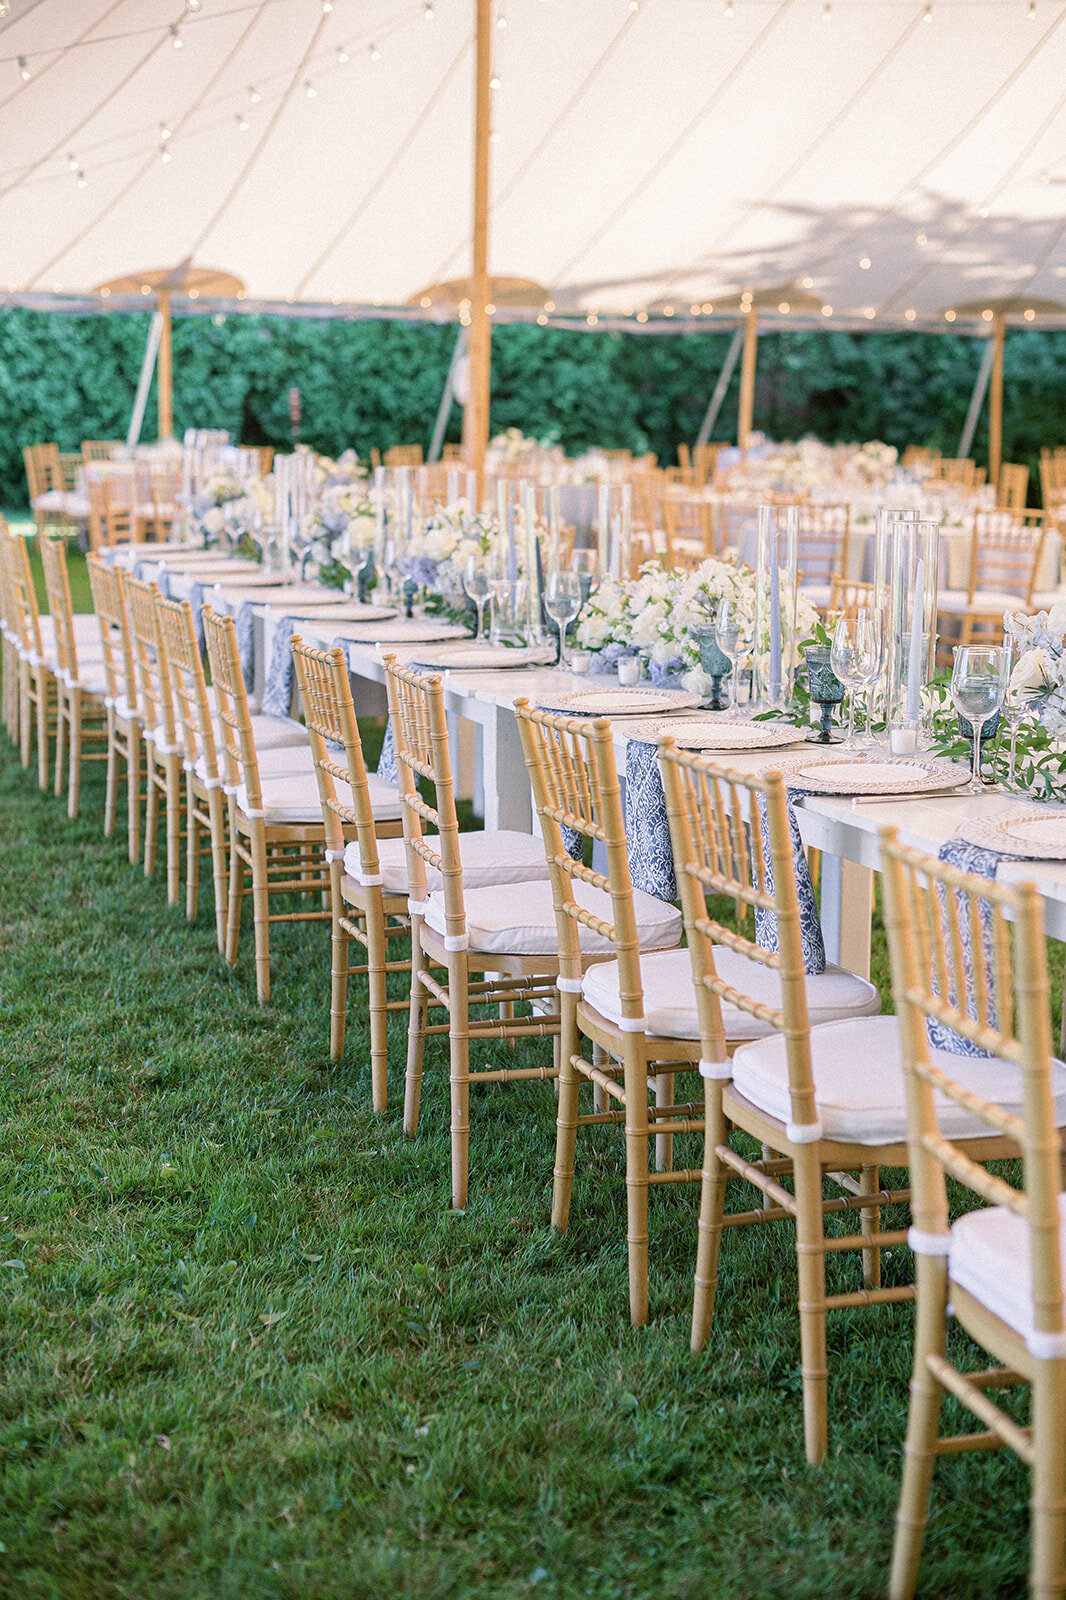 Kate-Murtaugh-Events-private-estate-tented-wedding-planner-headtable